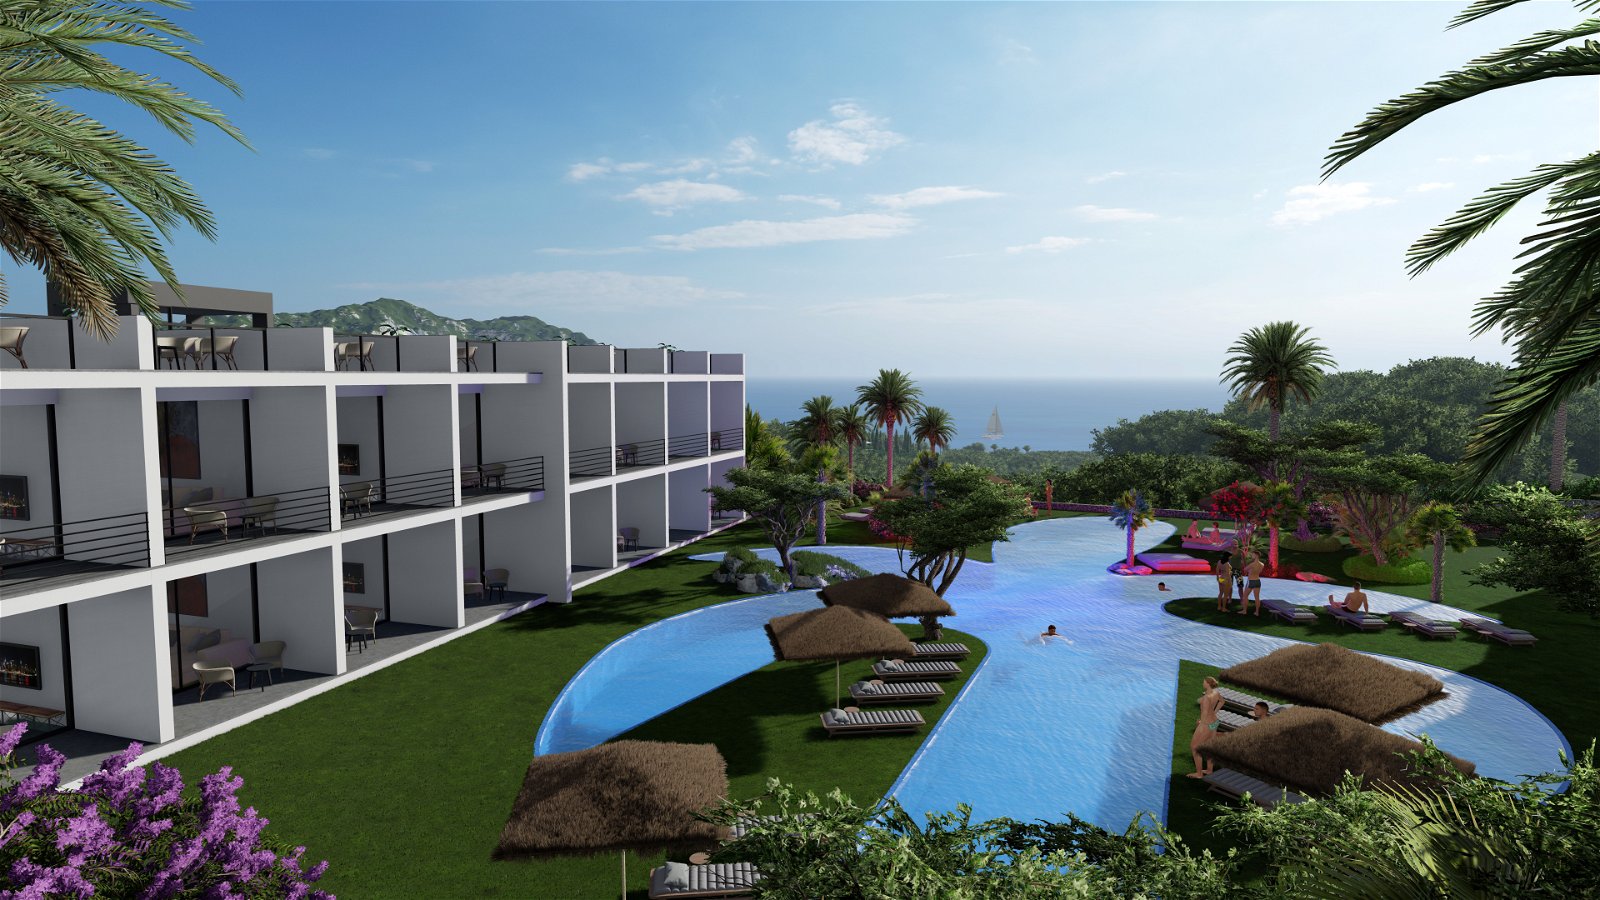 For Sale Apartments   Studio,  1+1 , 2+1  in Esentepe, Northern Cyprus-d8d02dae-abc6-4ba8-9976-0380062c3452